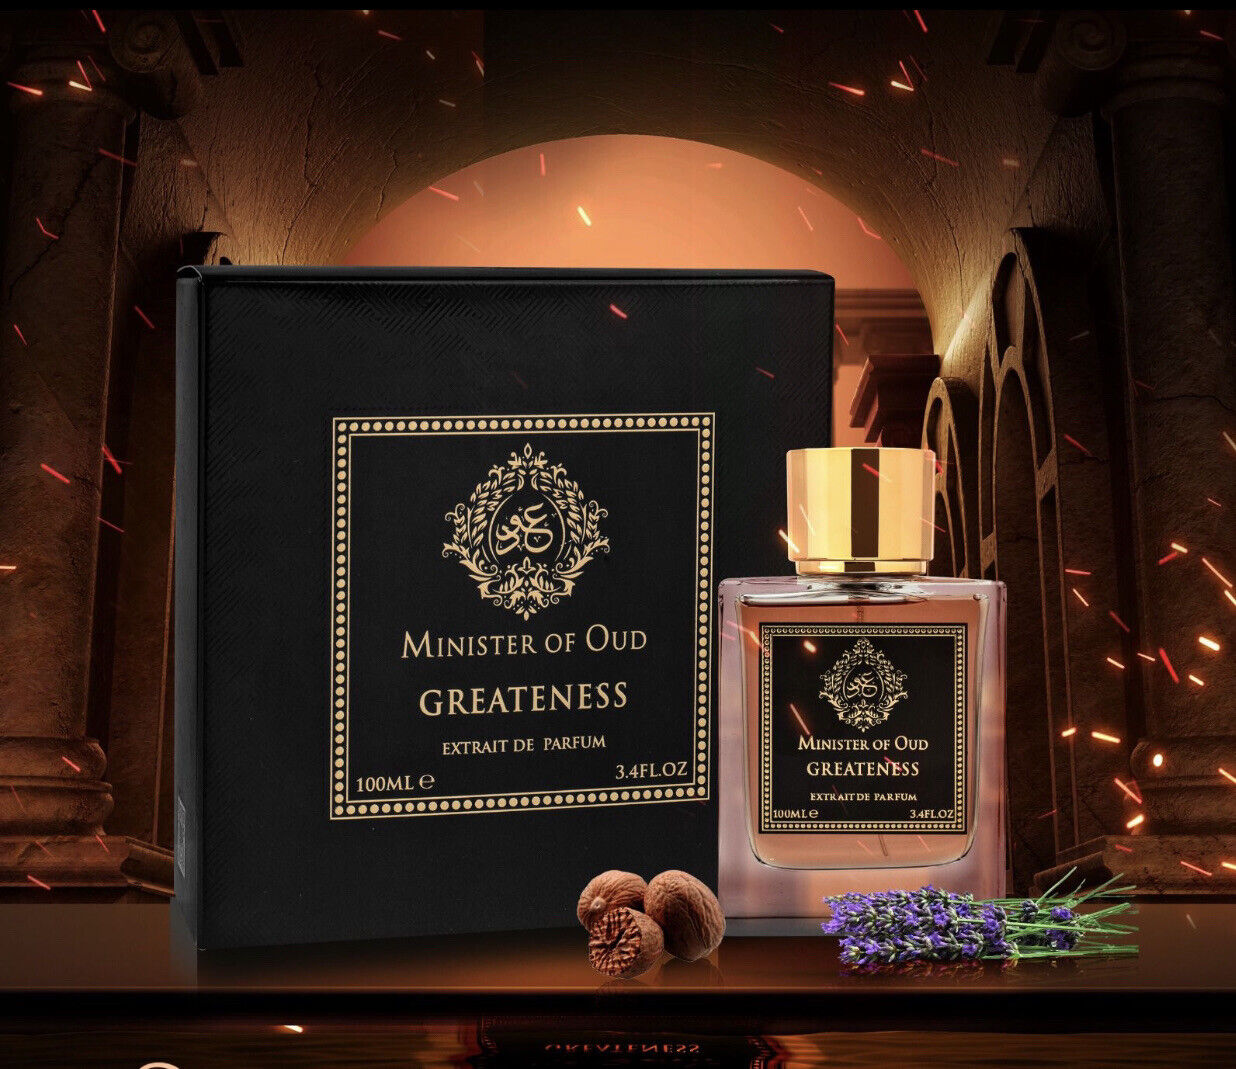 Minister Of Oud Greatness edp extrait 100 Ml By Fragrance World